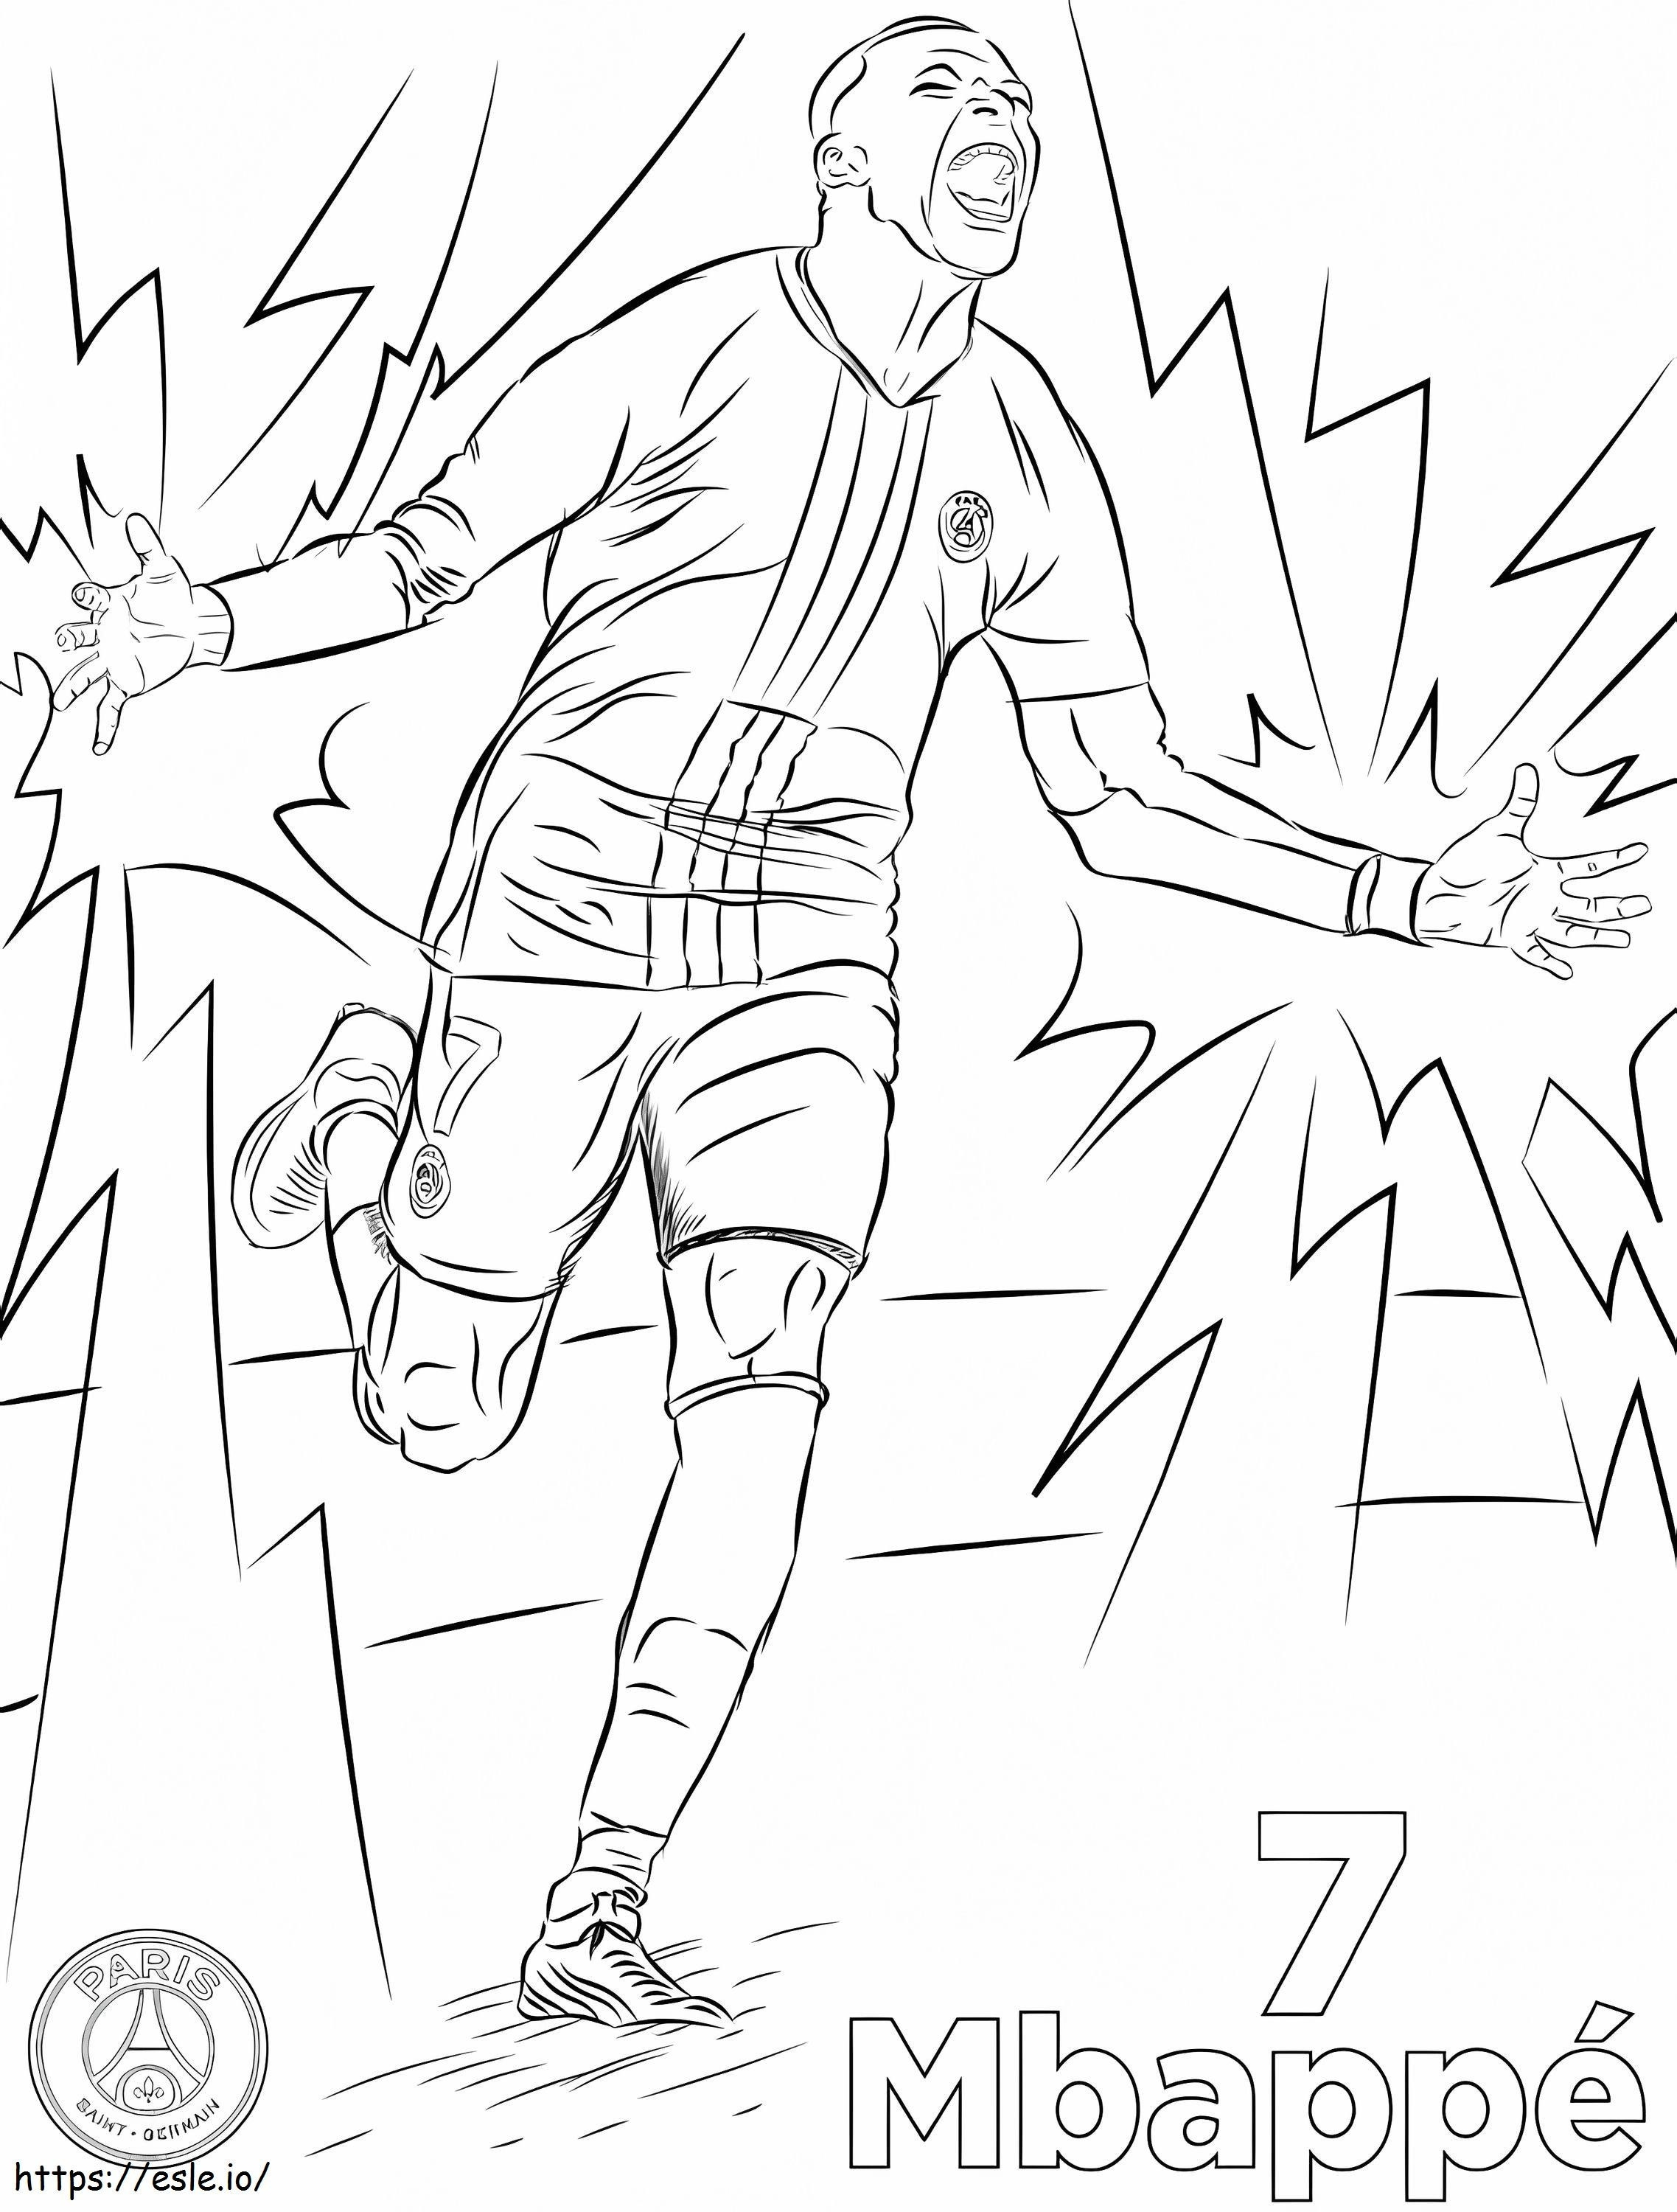 Kylian Mbappe 8 coloring page